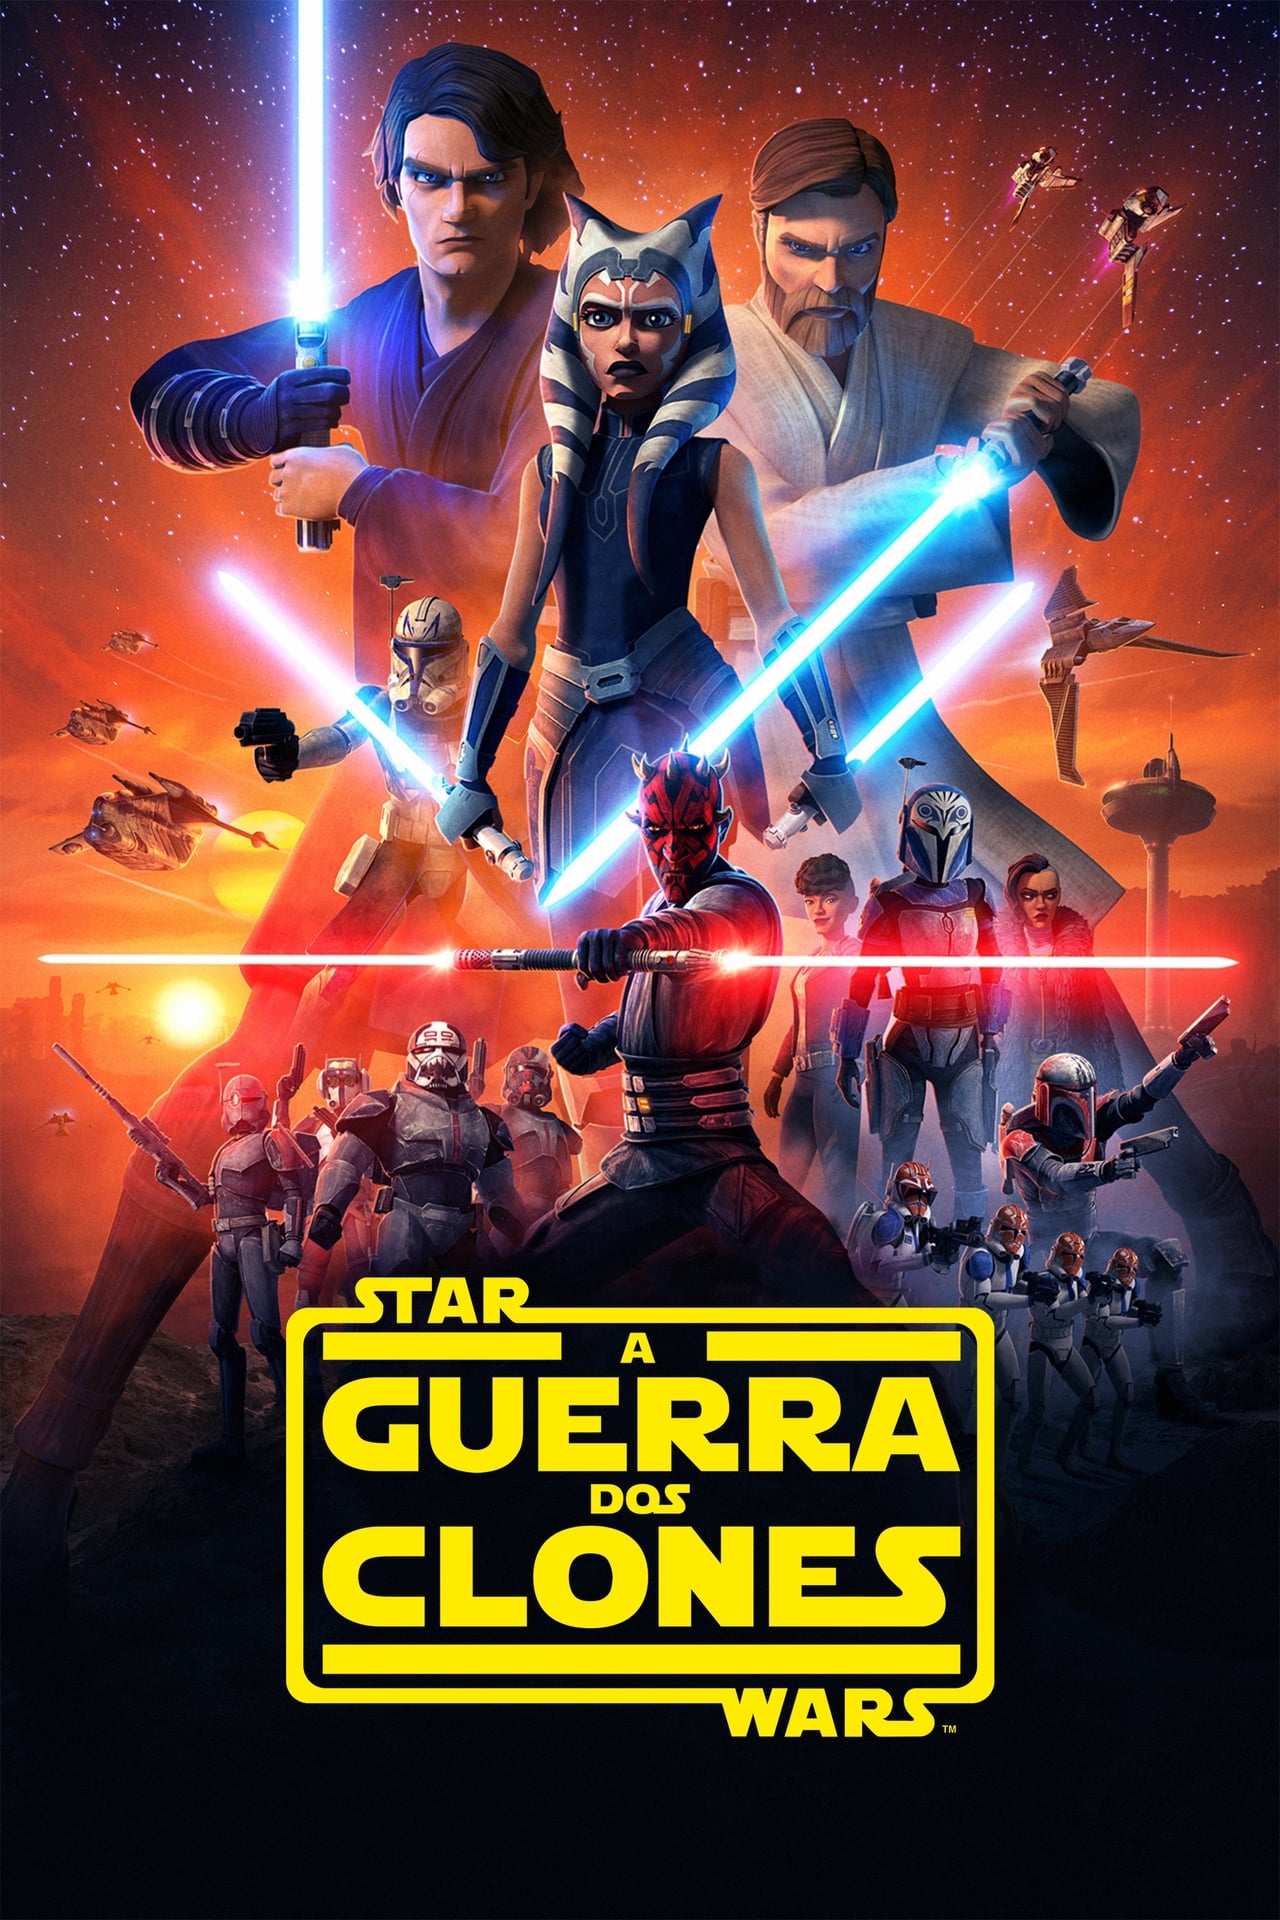 star-wars-the-clone-wars-lightsaber-duels-wiki-synopsis-reviews-movies-rankings